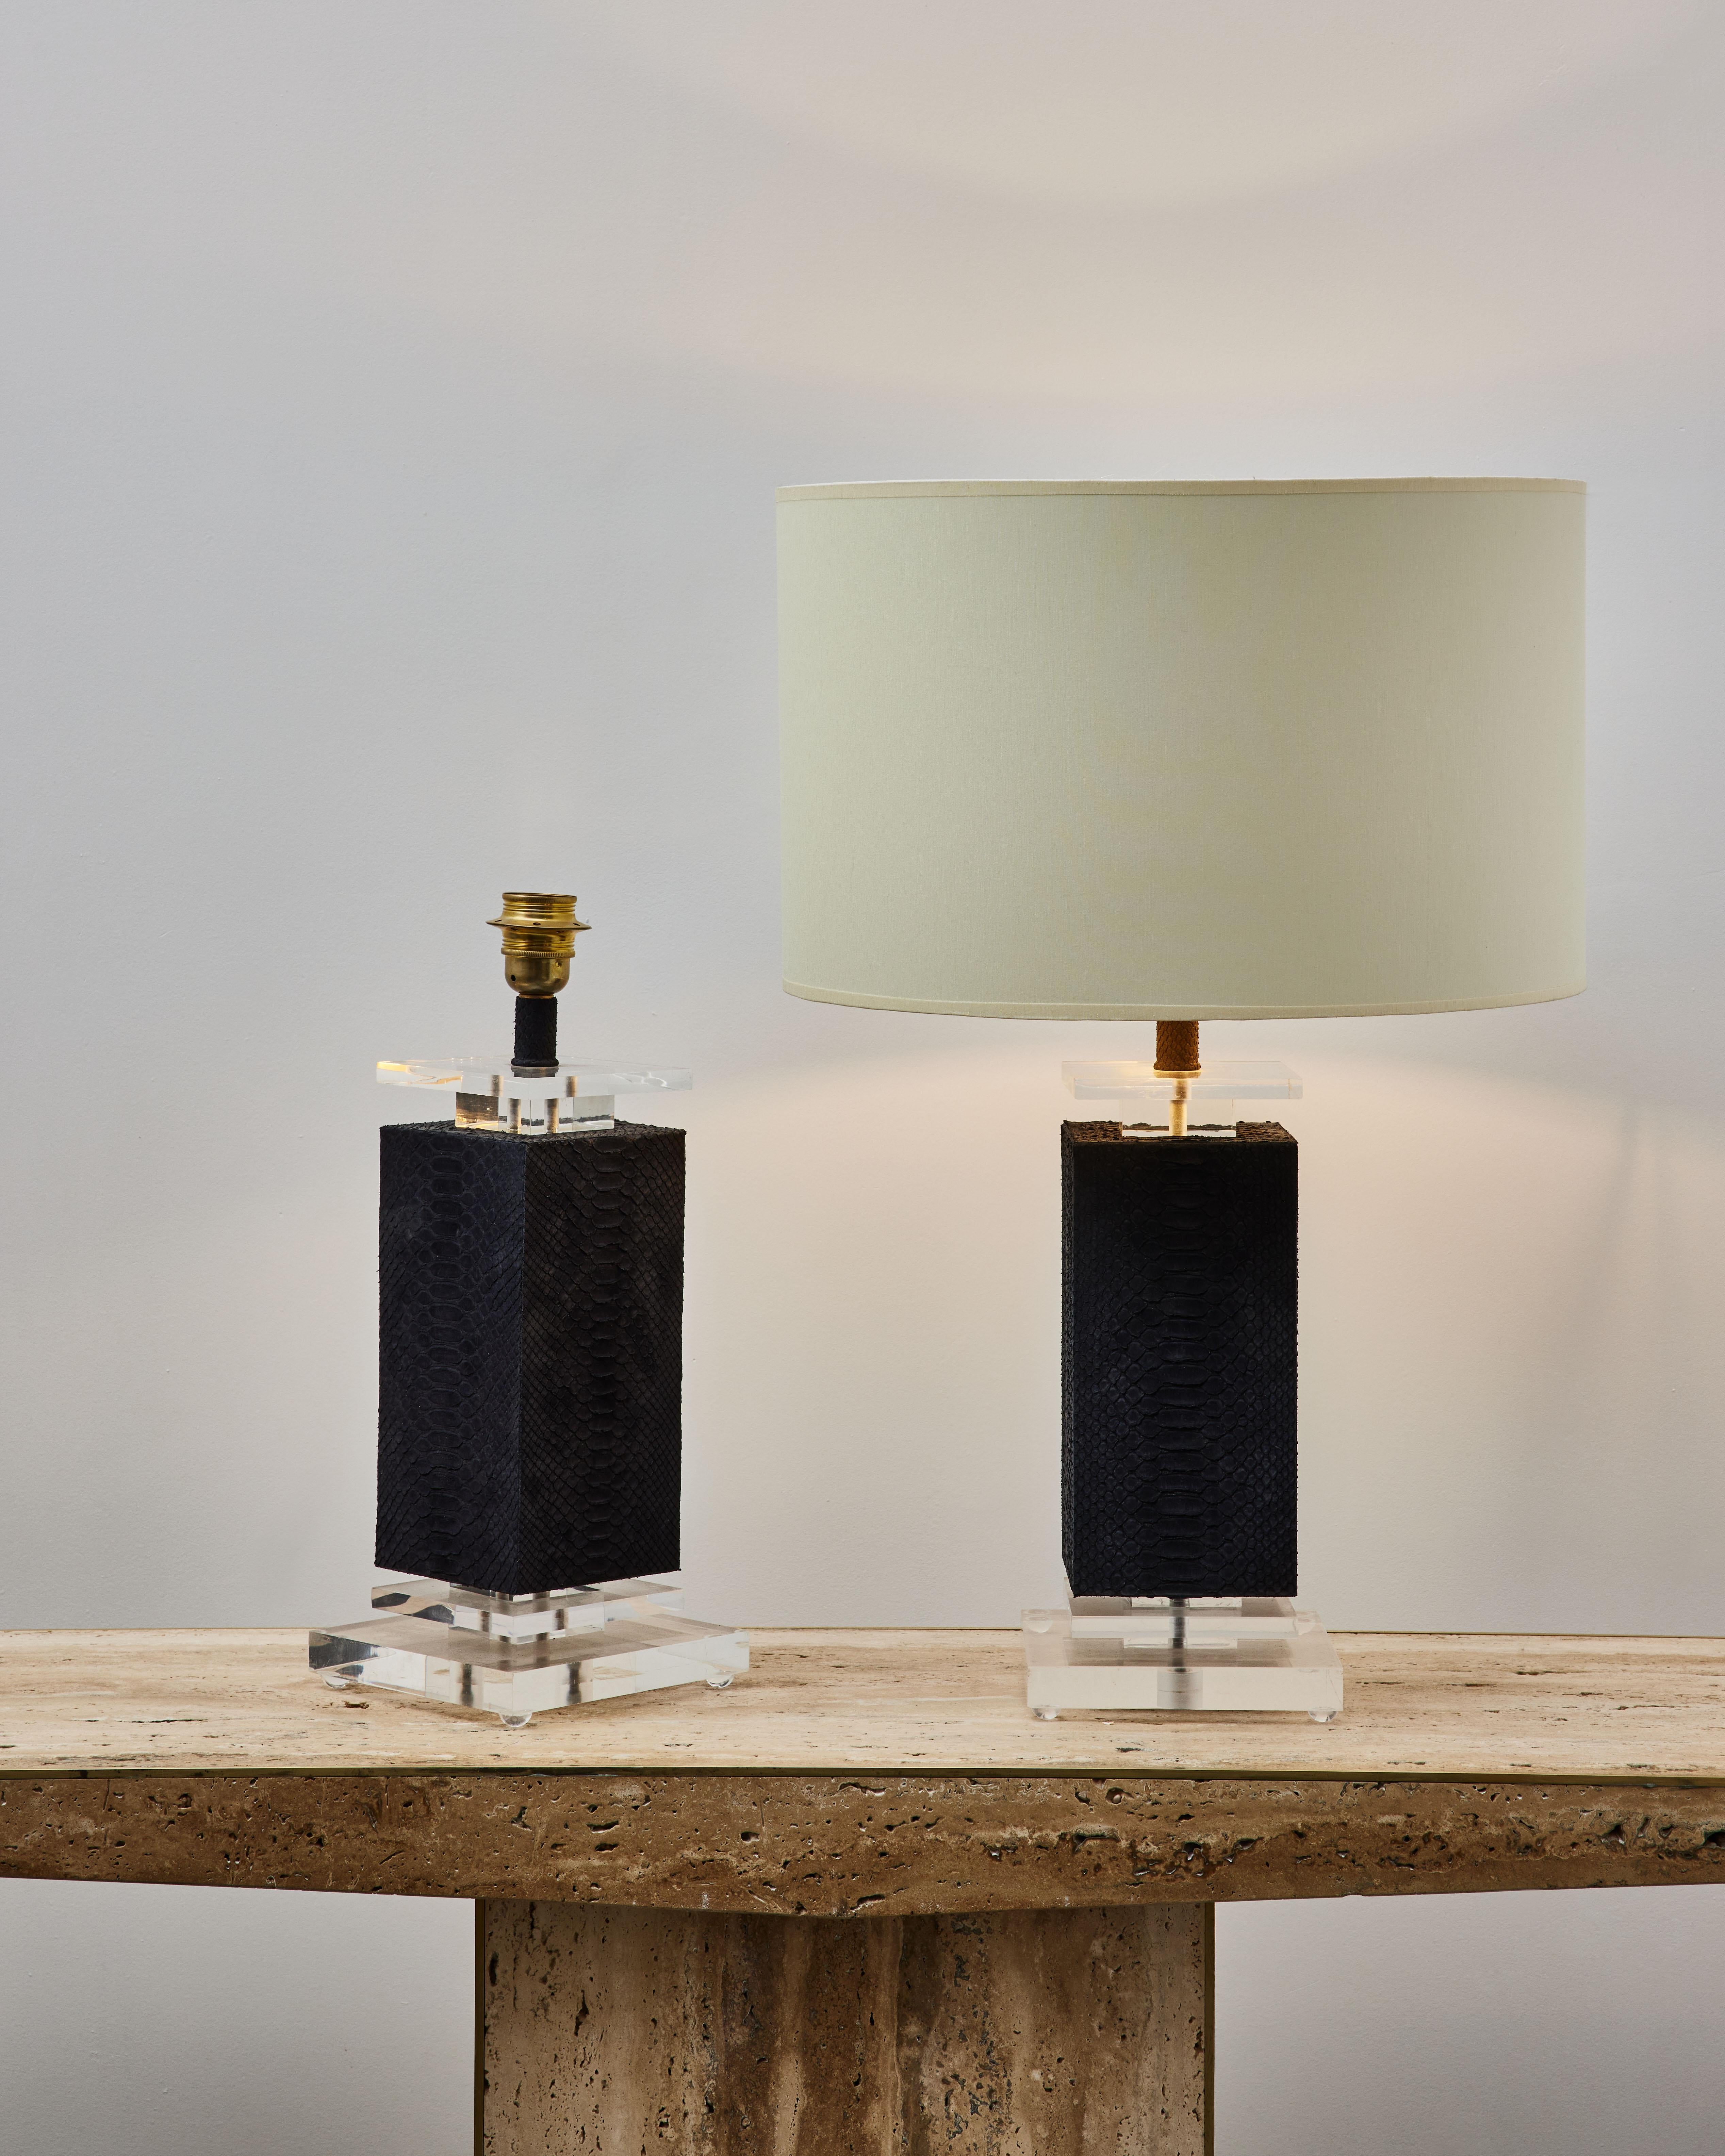 Pair of vintage table lamps in plexiglass and real python skin.
Customization by Studio Glustin
Italy, 1980s.

Dimensions: 17 x 17 x H 47 cm
(Price and dimensions without shade)